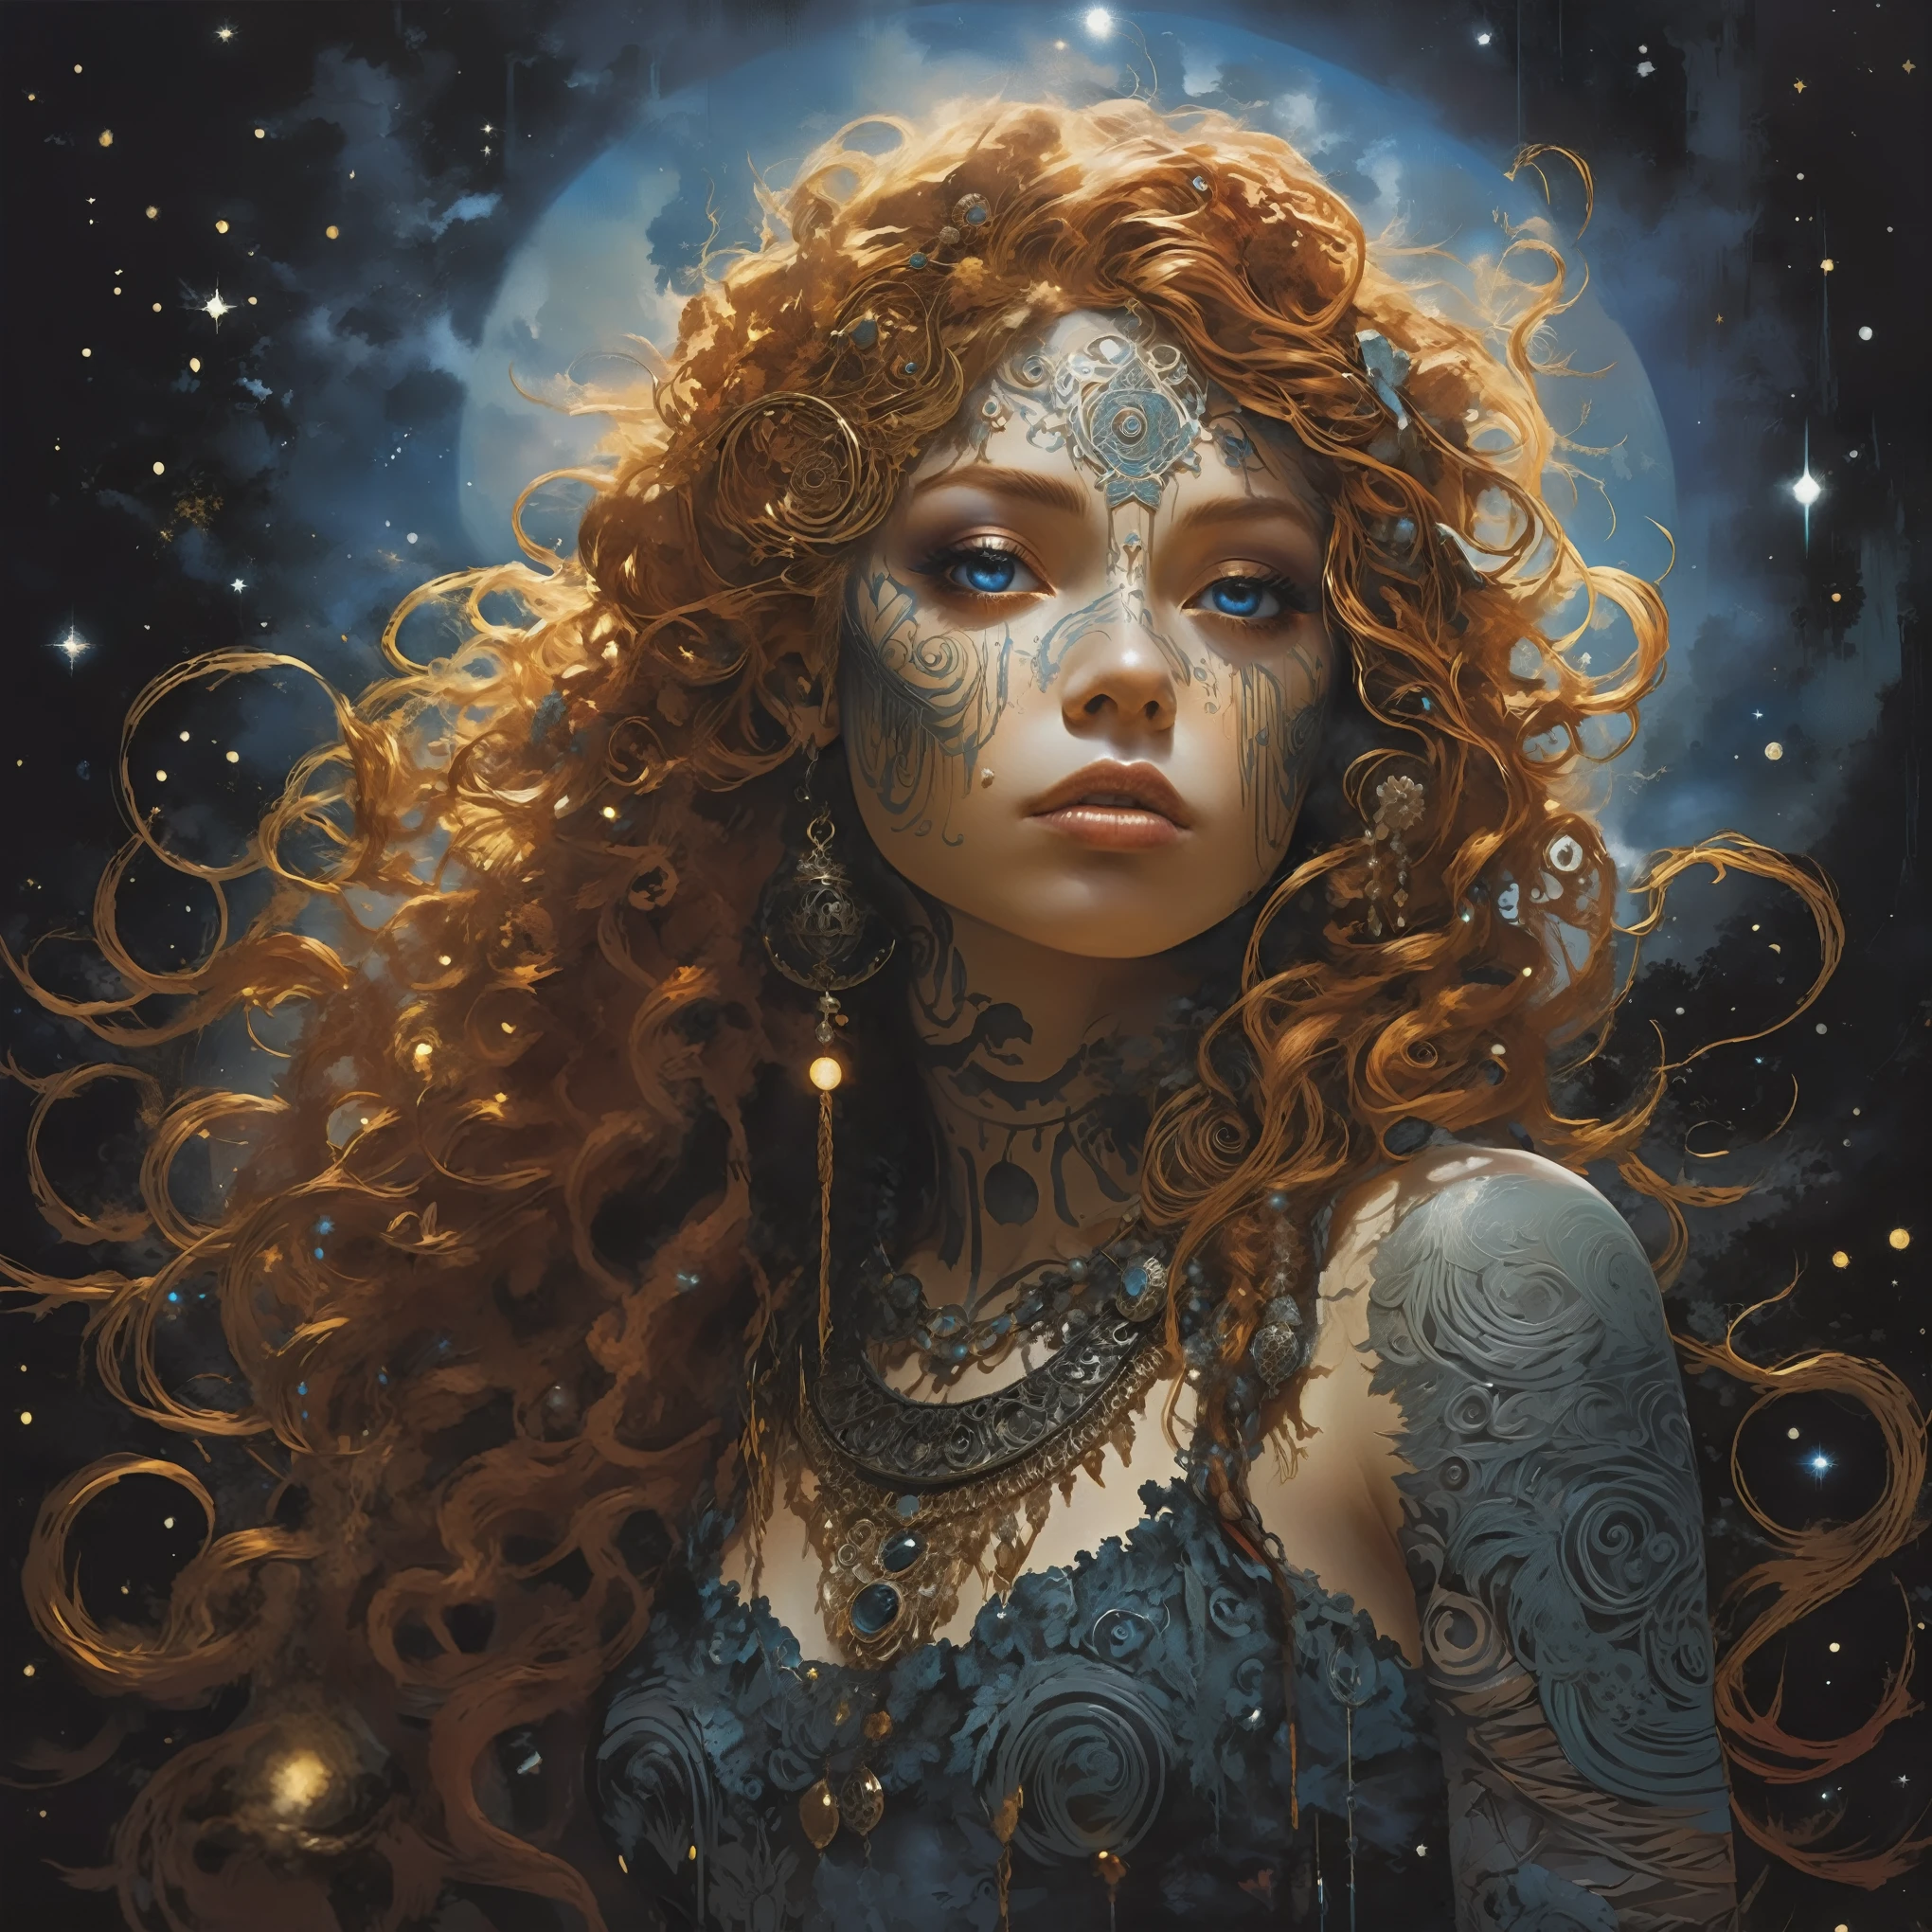 hyperrealistic portrait of a woman with a full moon in the background, karol bak uhd, beautiful fantasy portrait, portrait of a norse moon goddess, maiden with copper hair, ghostly tribal ginger woman made of smoke, big detailed glowing eyes, metal and glass parts, tattooed, filigree detailed, intricately ornate, highly detailed skin, color drops, extremely big moon, moonlight, stars, night. detailed sky with clouds, intricate pose, thick strokes, detailed oil painting by Dorian Vallejo, Damian Lechoszest storybook illustration, Todd Lockwood, Van Gogh starry sky, (ultra sharp focus. Cutting-edge Photorealistic Render, best quality, hypermaximalist quality. Extremely realistic scene with ray casting, path tracing, Ray tracing,Global Illumination, V-Ray Ambient Occlusion, whimsical godrays, lifelike Volumetric lighting, Specular Lighting, ultra realistic and luminous Volumetric shadows, Diffuse Light, Diffuse Reflection, Diffuse Interreflection, Smooth shading, delicate Volumetric Fog, photon mapping, texture mapping, Environment Mapping, bump mapping, displacement mapping, tone mapping, shadow mapping, Radiosity, Scanline rendering, Simplygon, Subsurface Scattering, long and deep shadows, light caustics, :1.3), subtle atmospheric effects, dazzling light effects, luminism, (max intricate details utilizing meticulous layered detailing to achieve insanely ultra high intricate Levels of Detail, max geometry detail, max scene detail, insanely intricate max environment detail:1.2). (Perfectly Enhanced Quality Supersampling Anti-Aliasing, anisotropic filtering, sharpening filter, sharpen and smoothen the crystal clear image to bring out contours:1.2). Perfectly arranged and detailed dynamic scene and background, (amazing depth, immersive Depth Buffer:1:1). Perfect contrast, brightness, hues, composition and saturation with (vivid CMYK colors to make the image pop. Professional mirrorless camera, ultra HD Absurdres Super-Resolution mode:1.3). Painstaking attention to detail